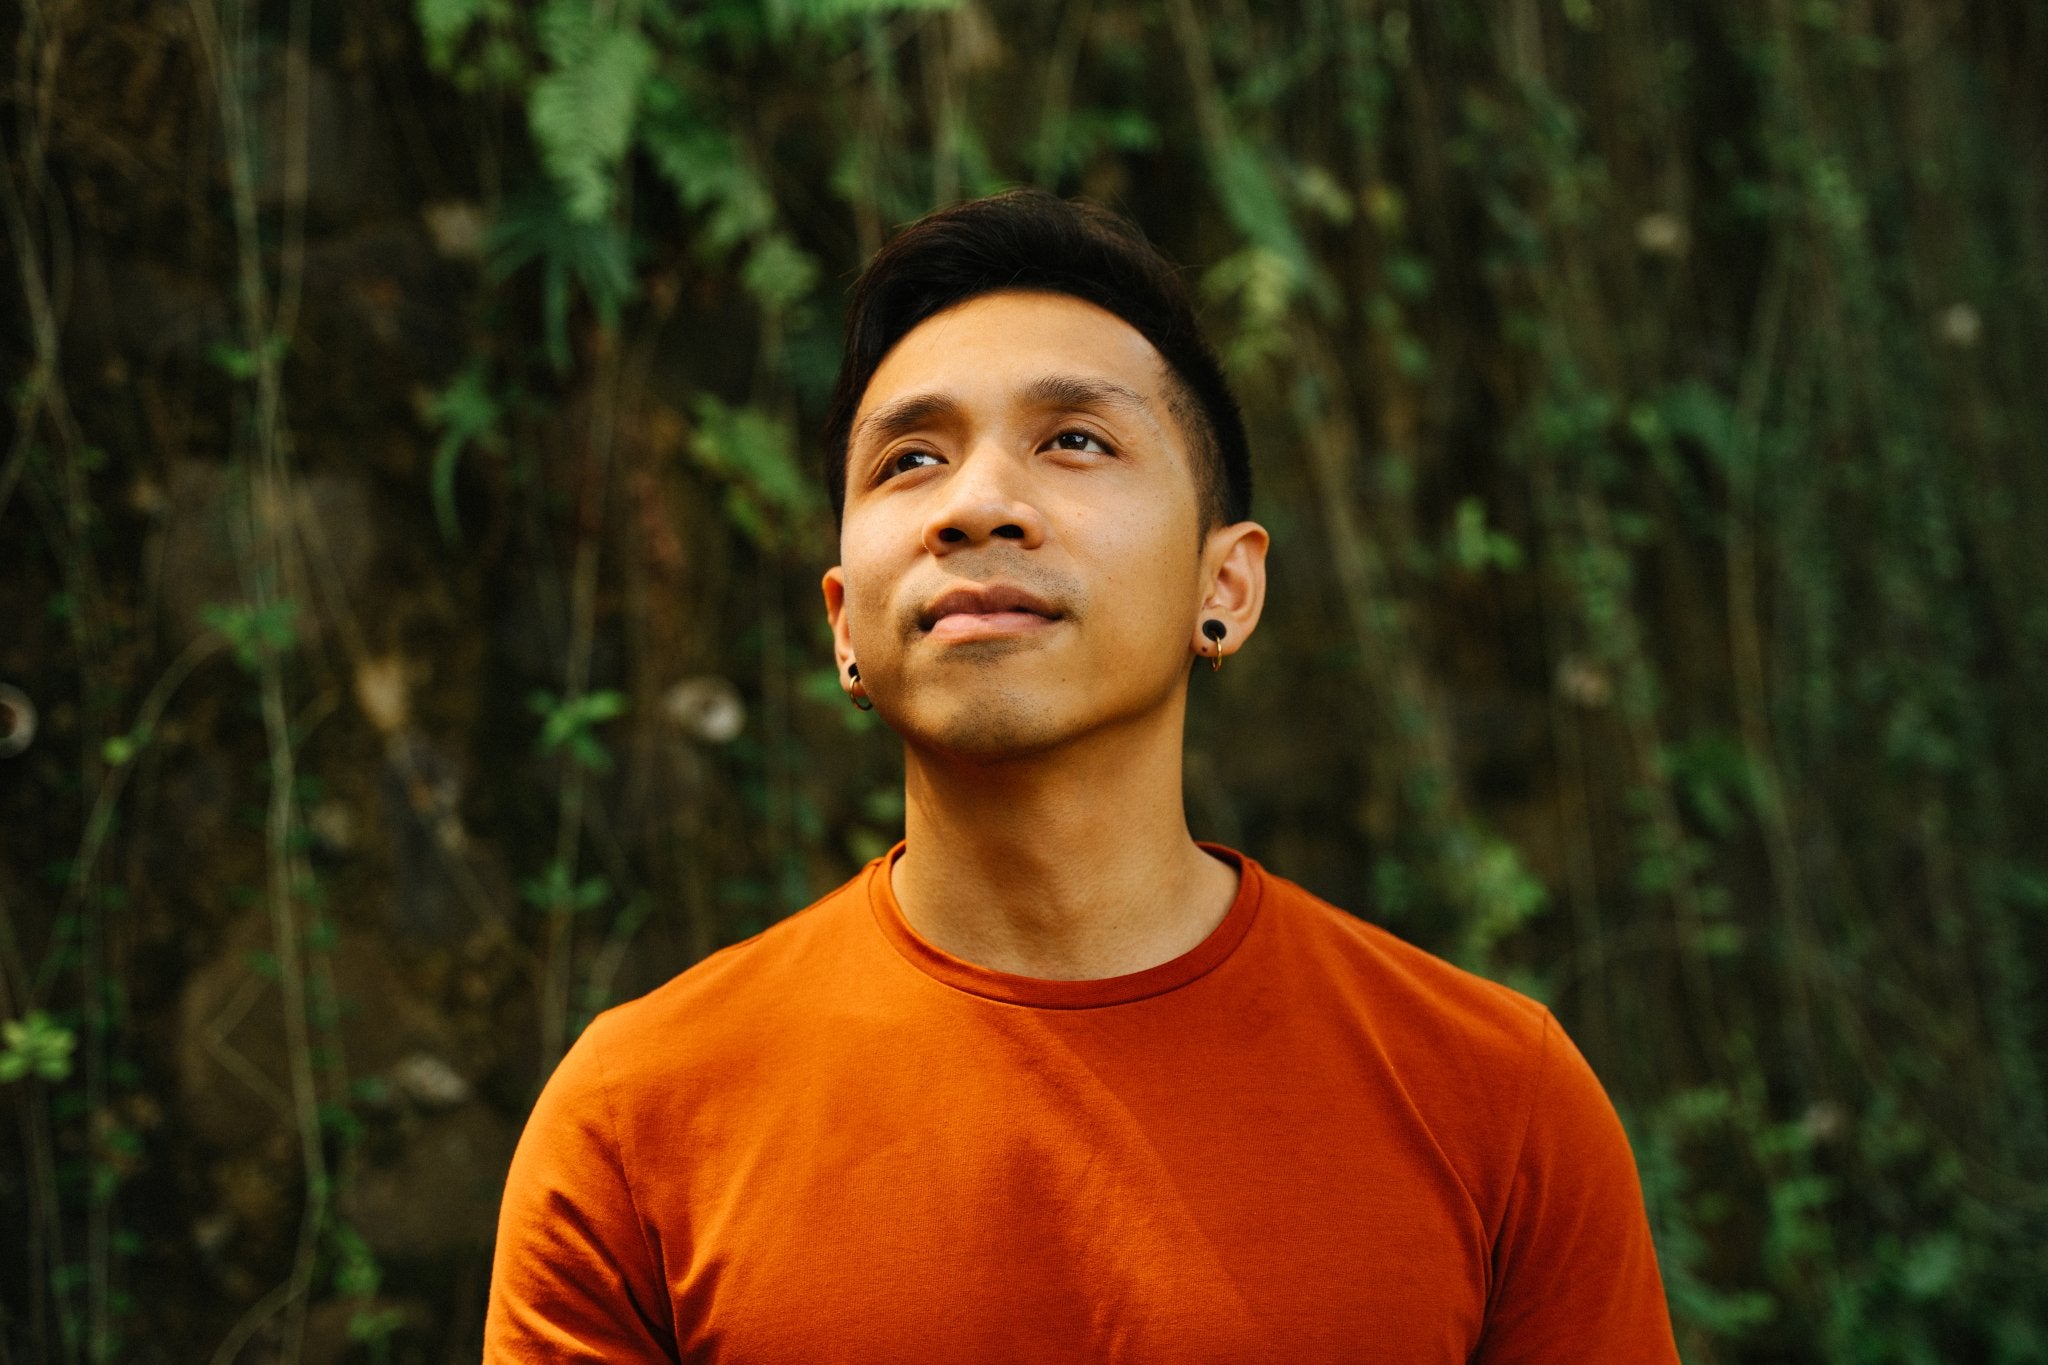 Bayu coach at Life Architekture, wearing orange t-shirt, face looking up, in jungle stone wall background